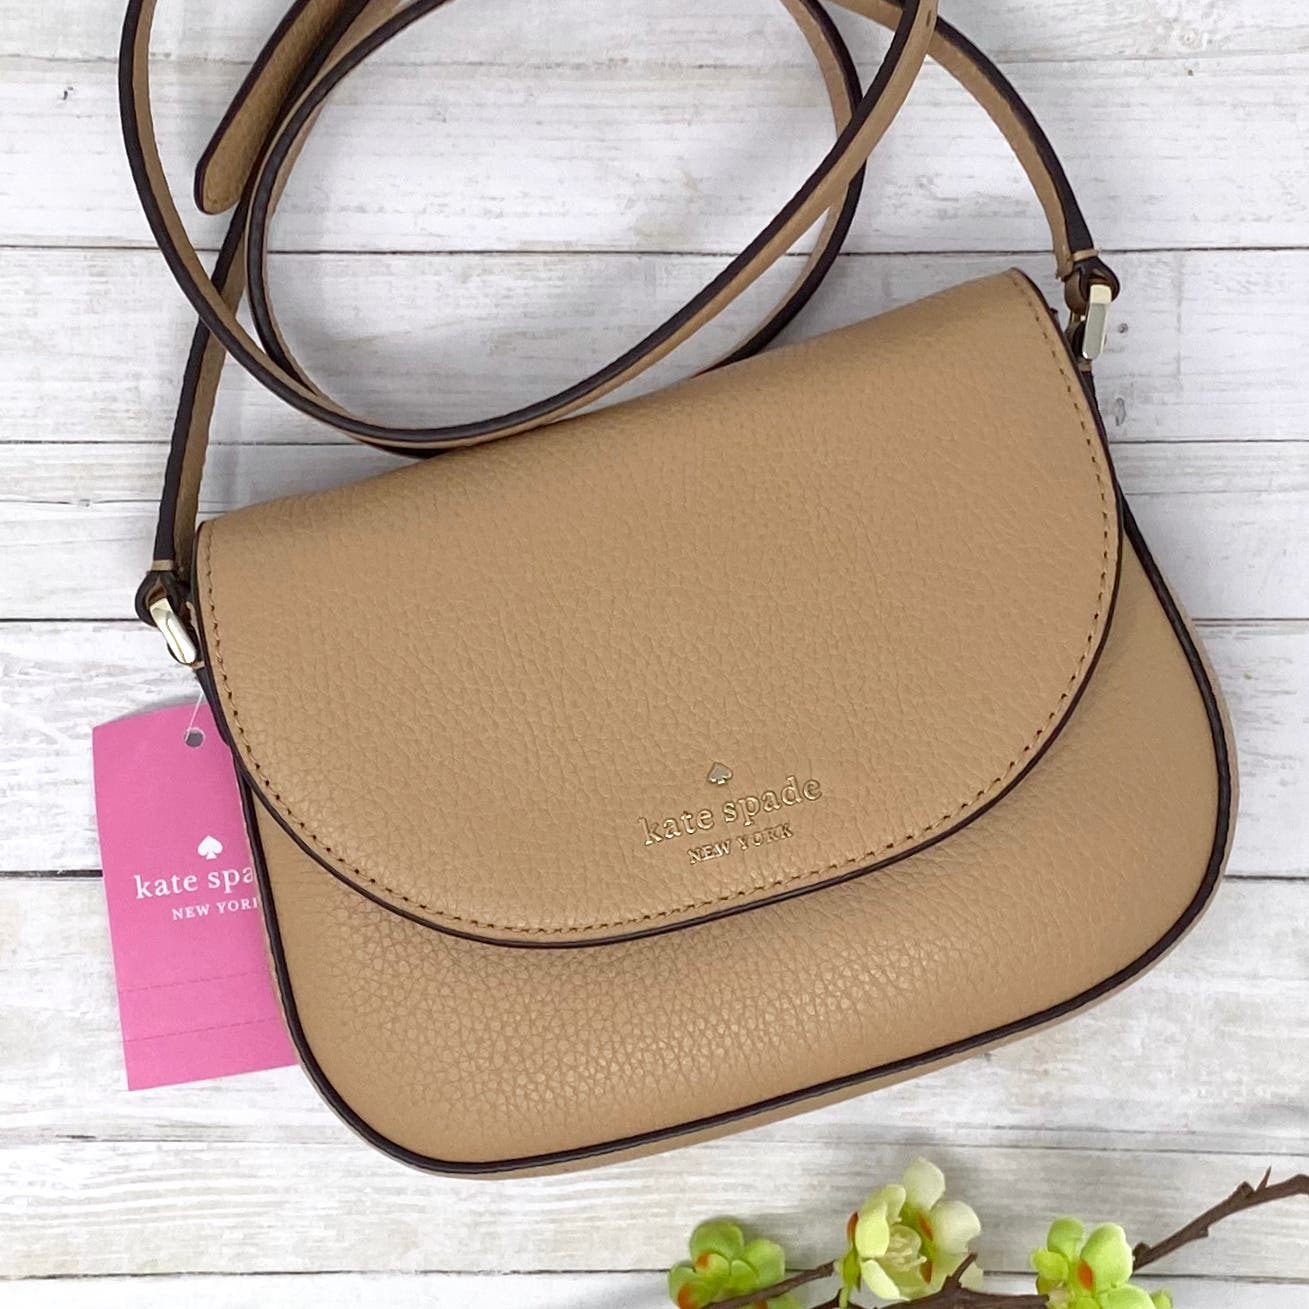 Primary image for Kate Spade Leila Mini Flap Crossbody Purse in Light Fawn Beige Leather wlr00396